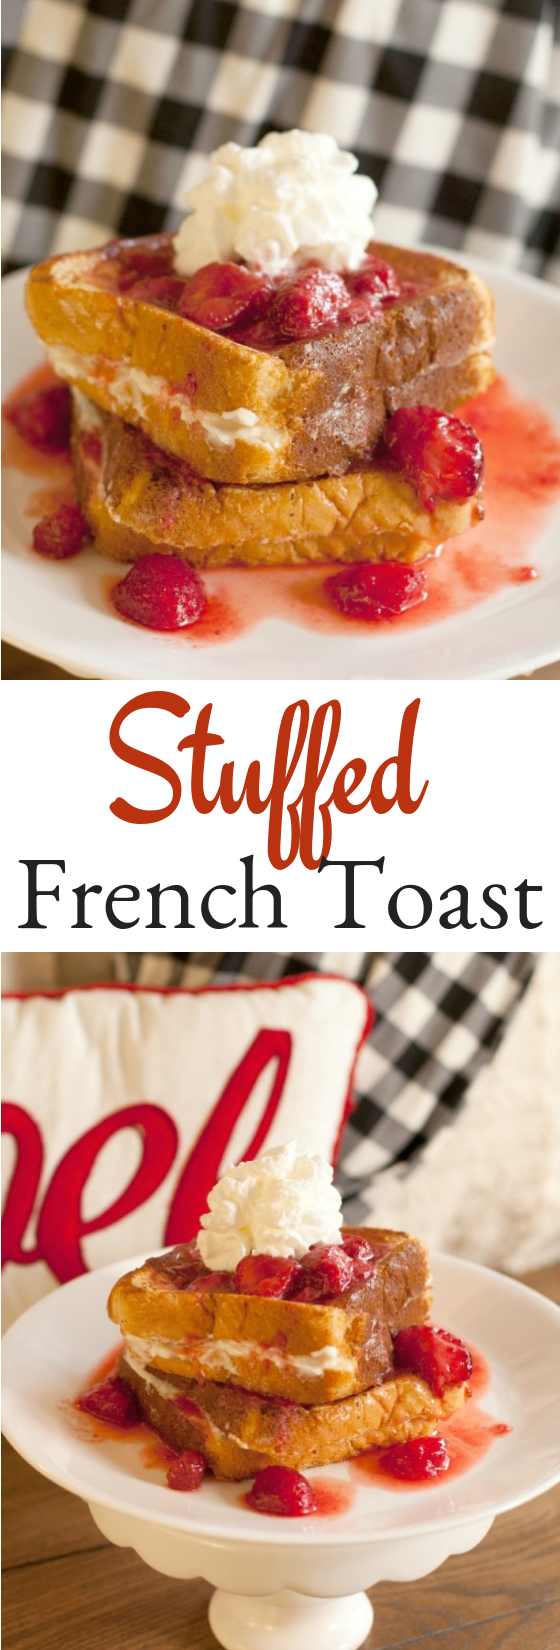 Stuffed French Toast with cream cheese and strawberries.